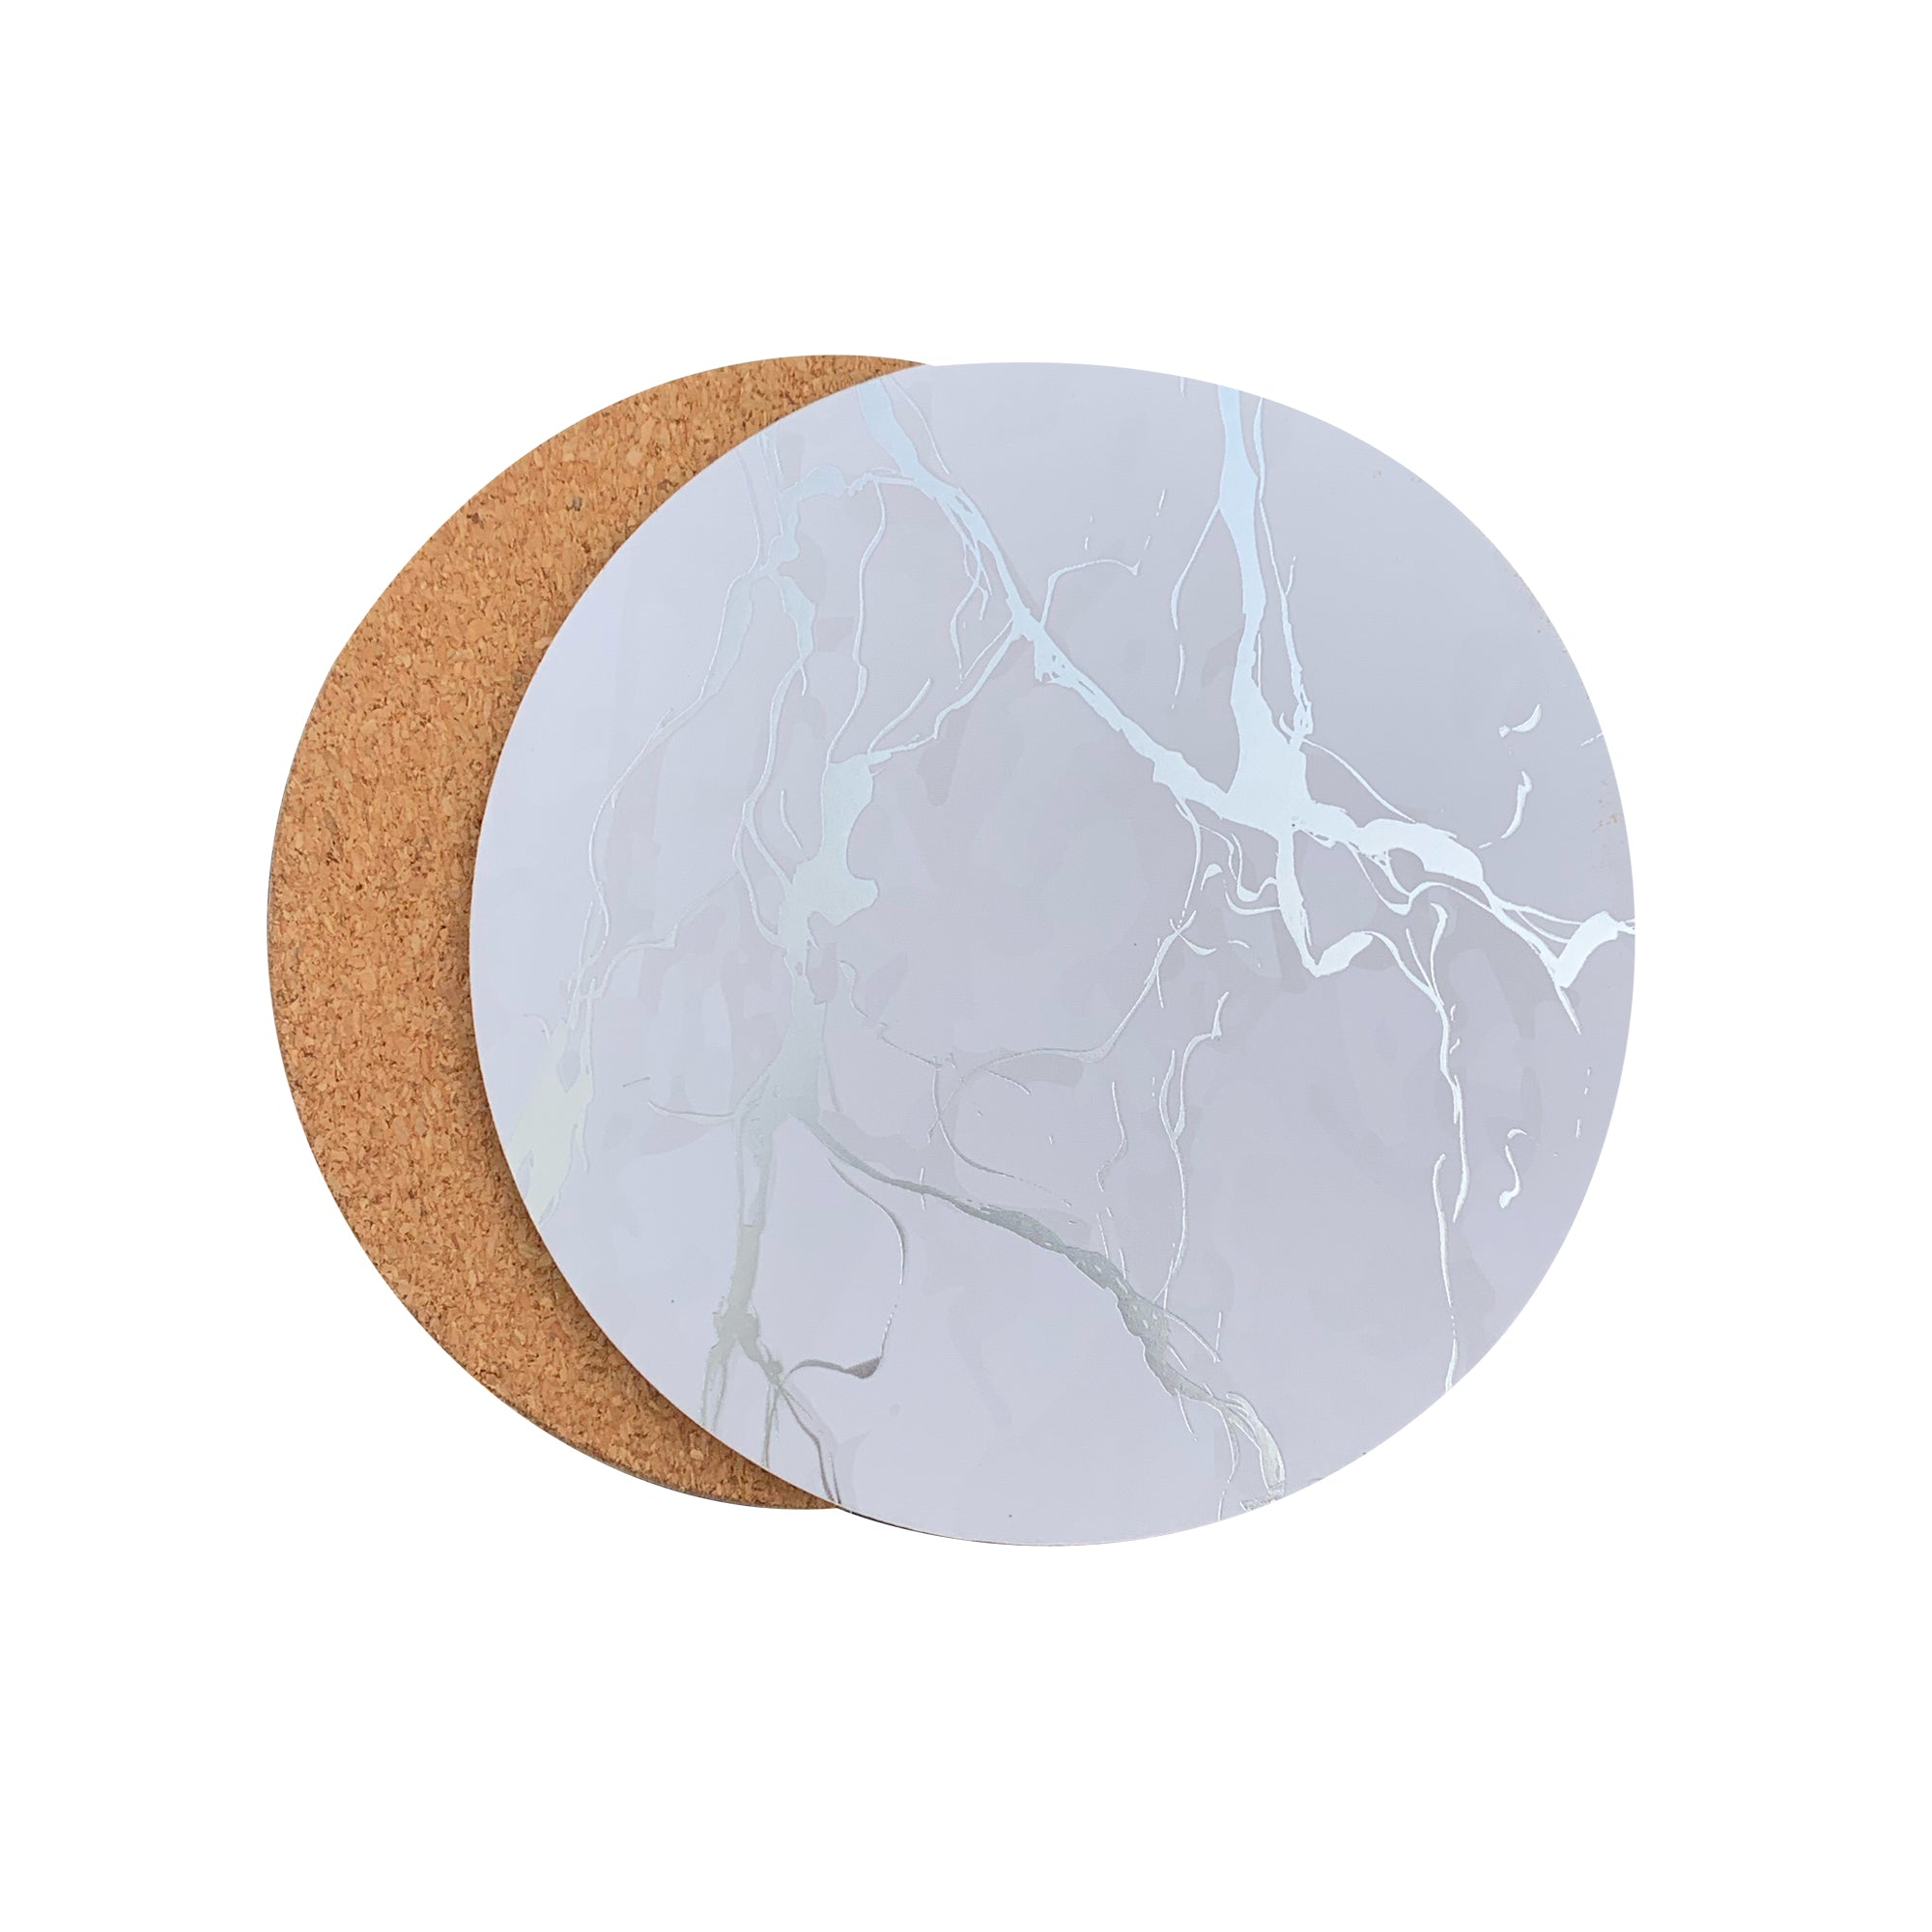 Dainty Home Marble Cork Foil Printed Marble Granite Designed Thick Cork Textured 4" x 4" Round Coasters